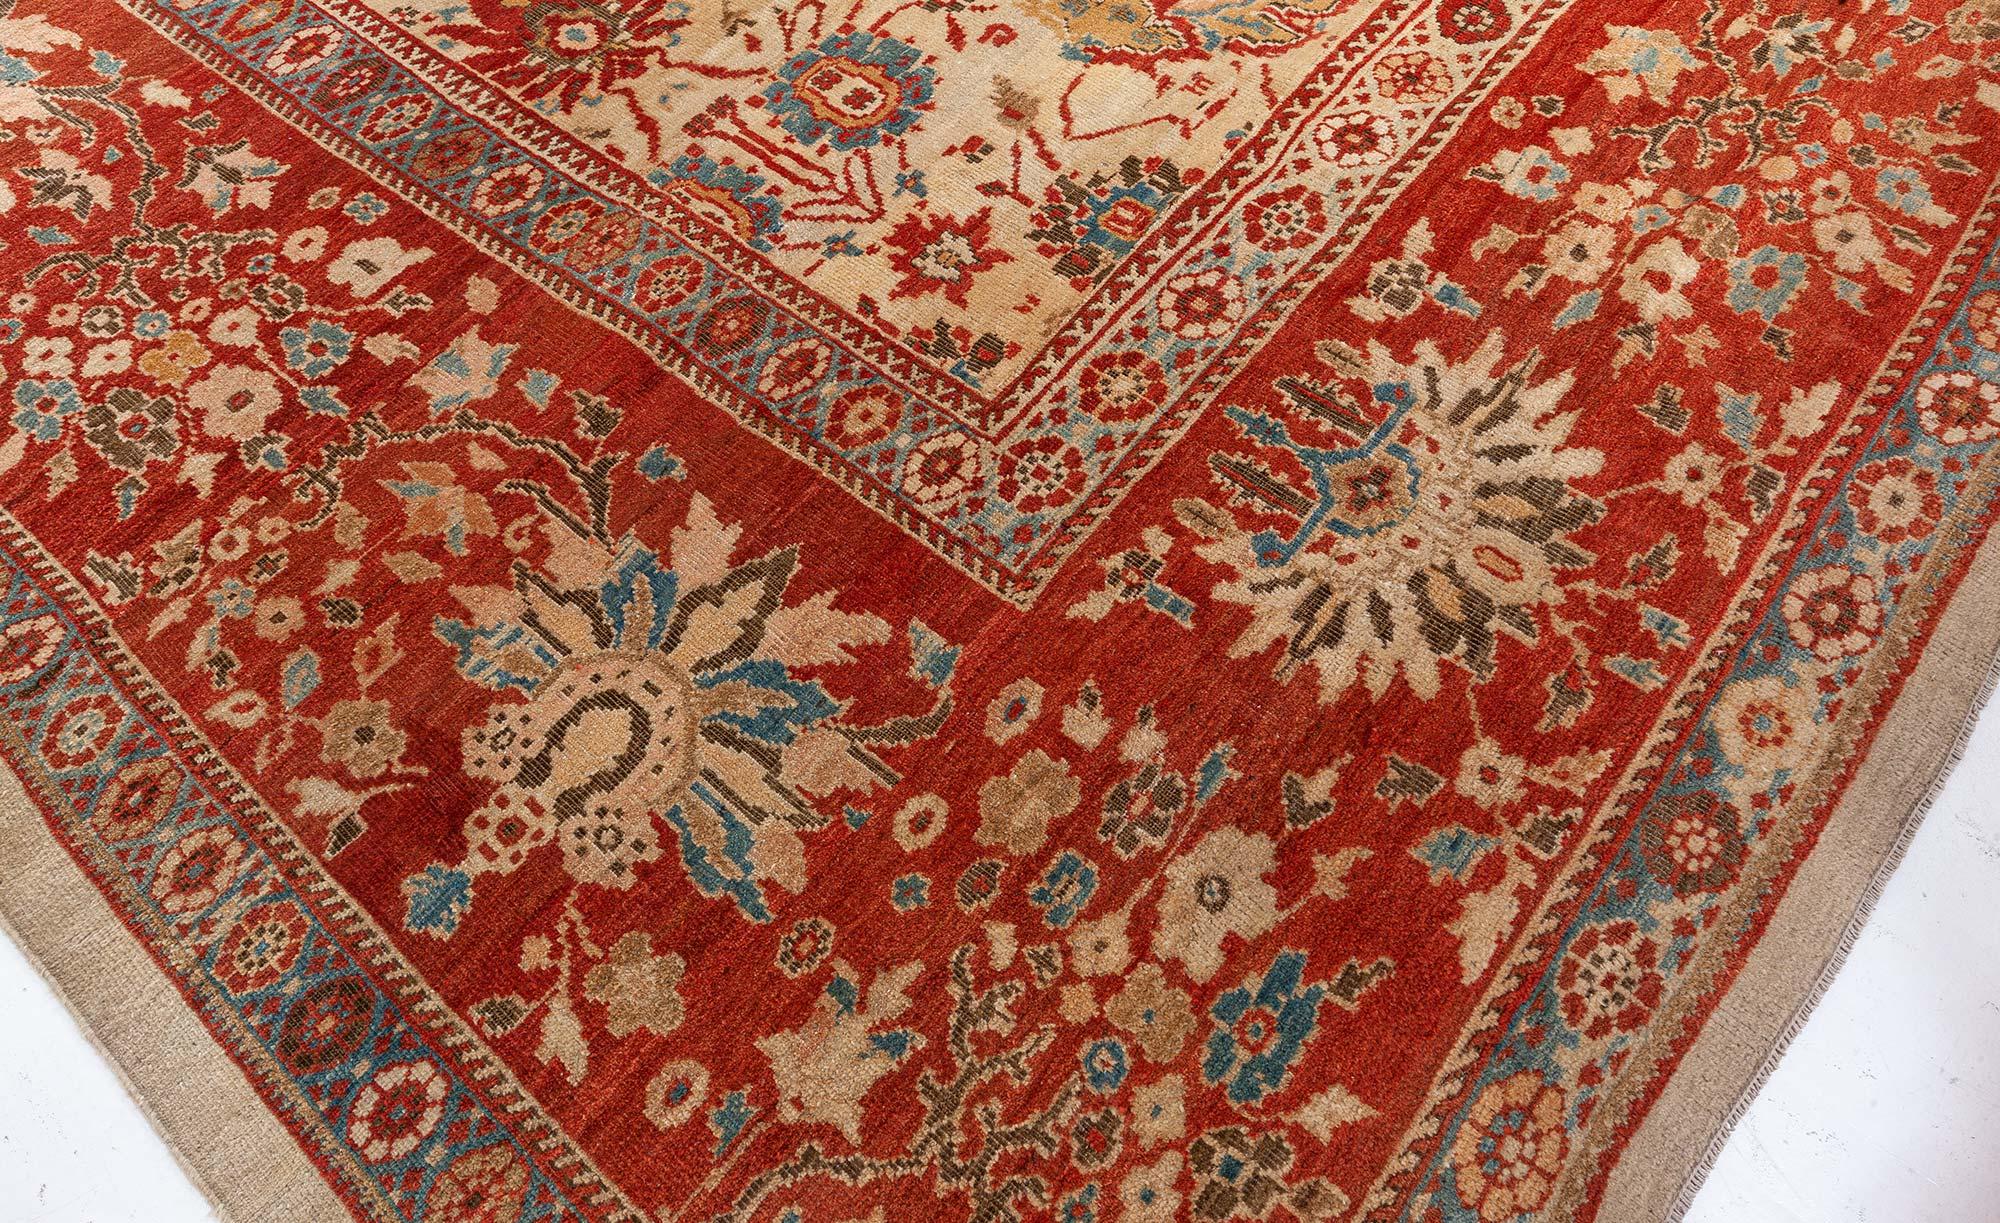  19th Century Persian Sultanabad red blue beige rug (size adjusted)
Size: 15'3